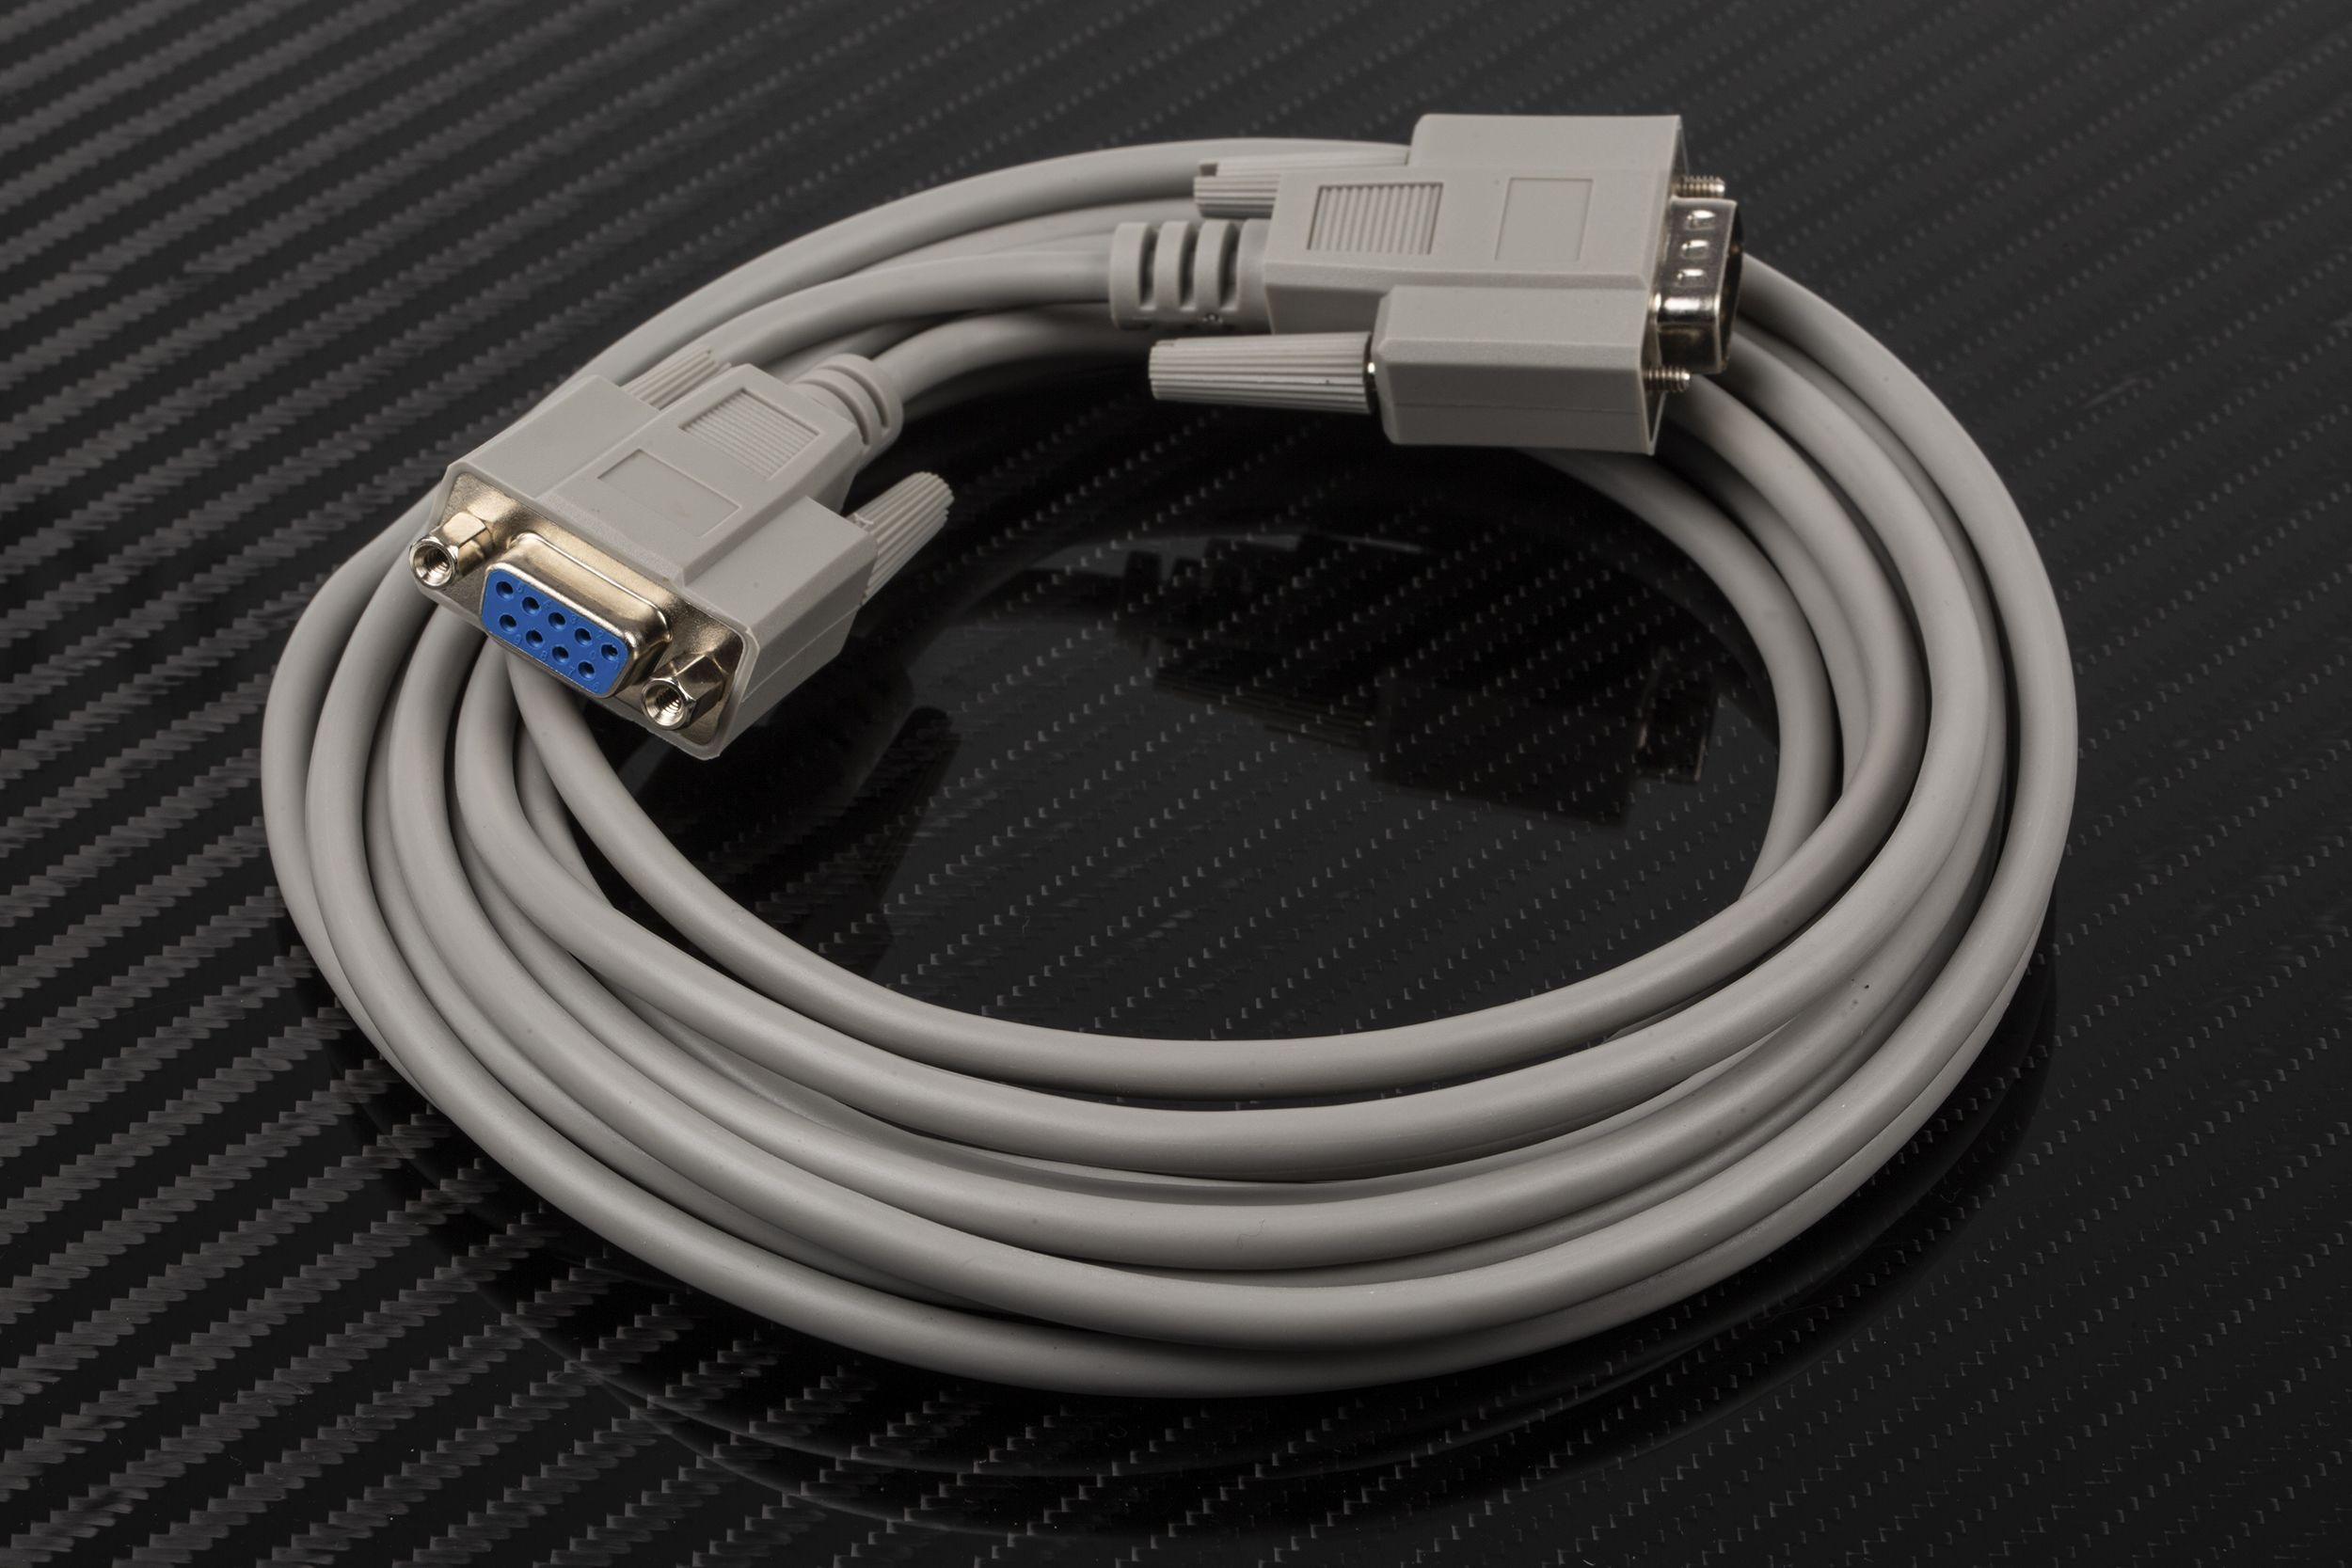 RS PRO 5m 9 pin D-sub to 9 pin D-sub Serial Cable